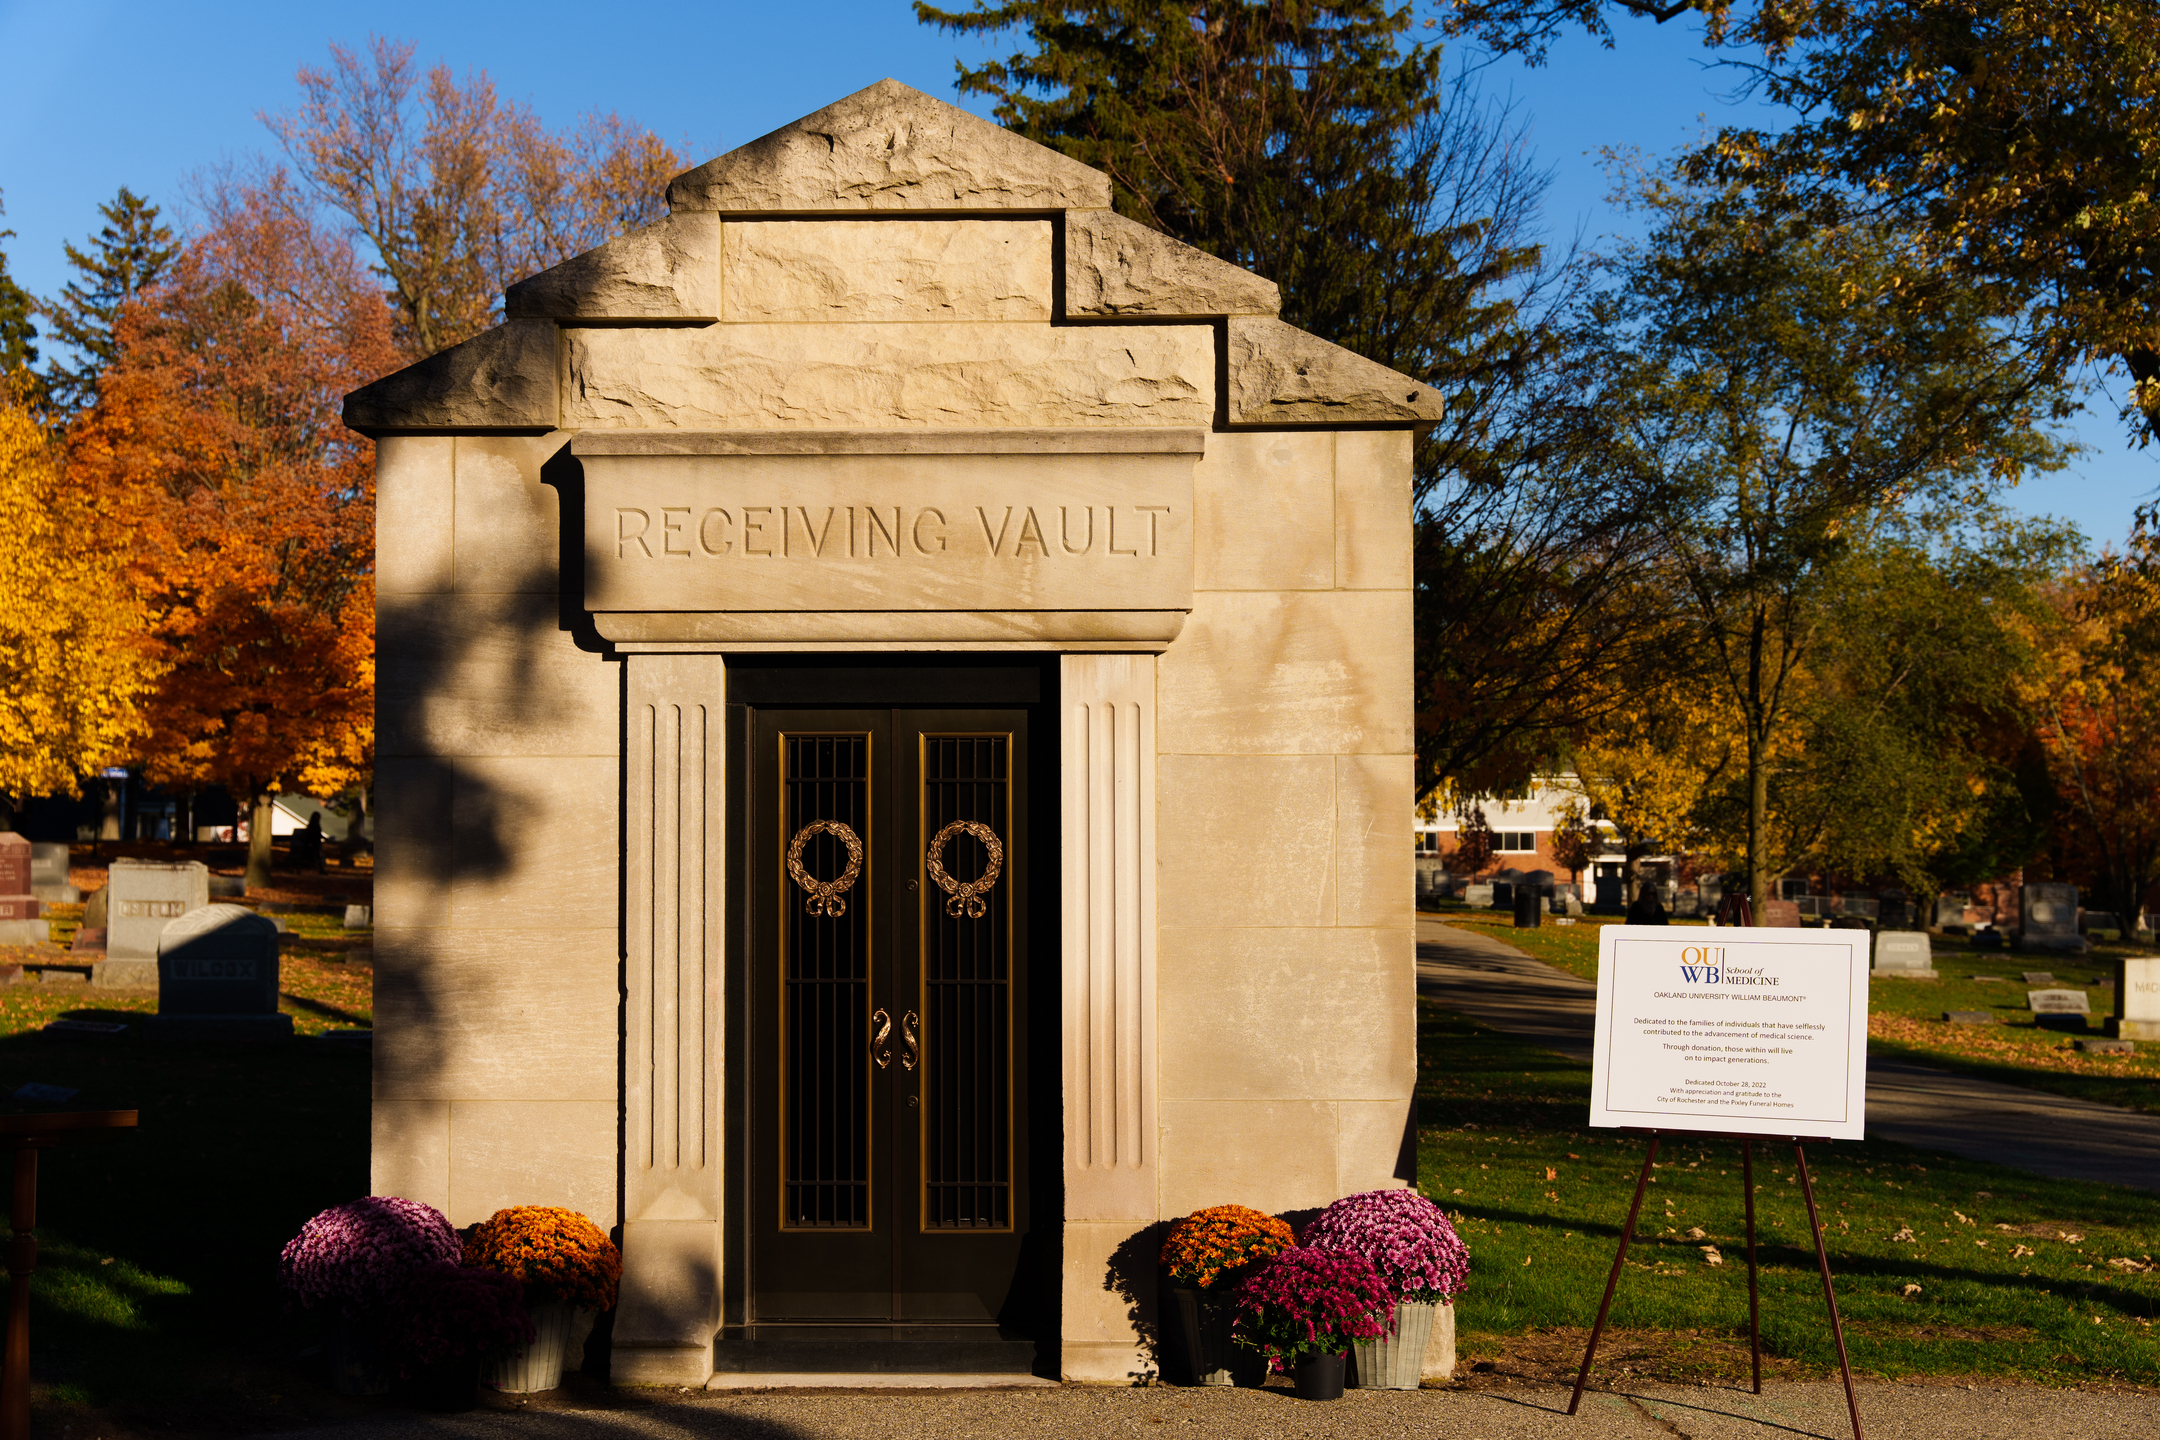 An image of the exterior of the vault